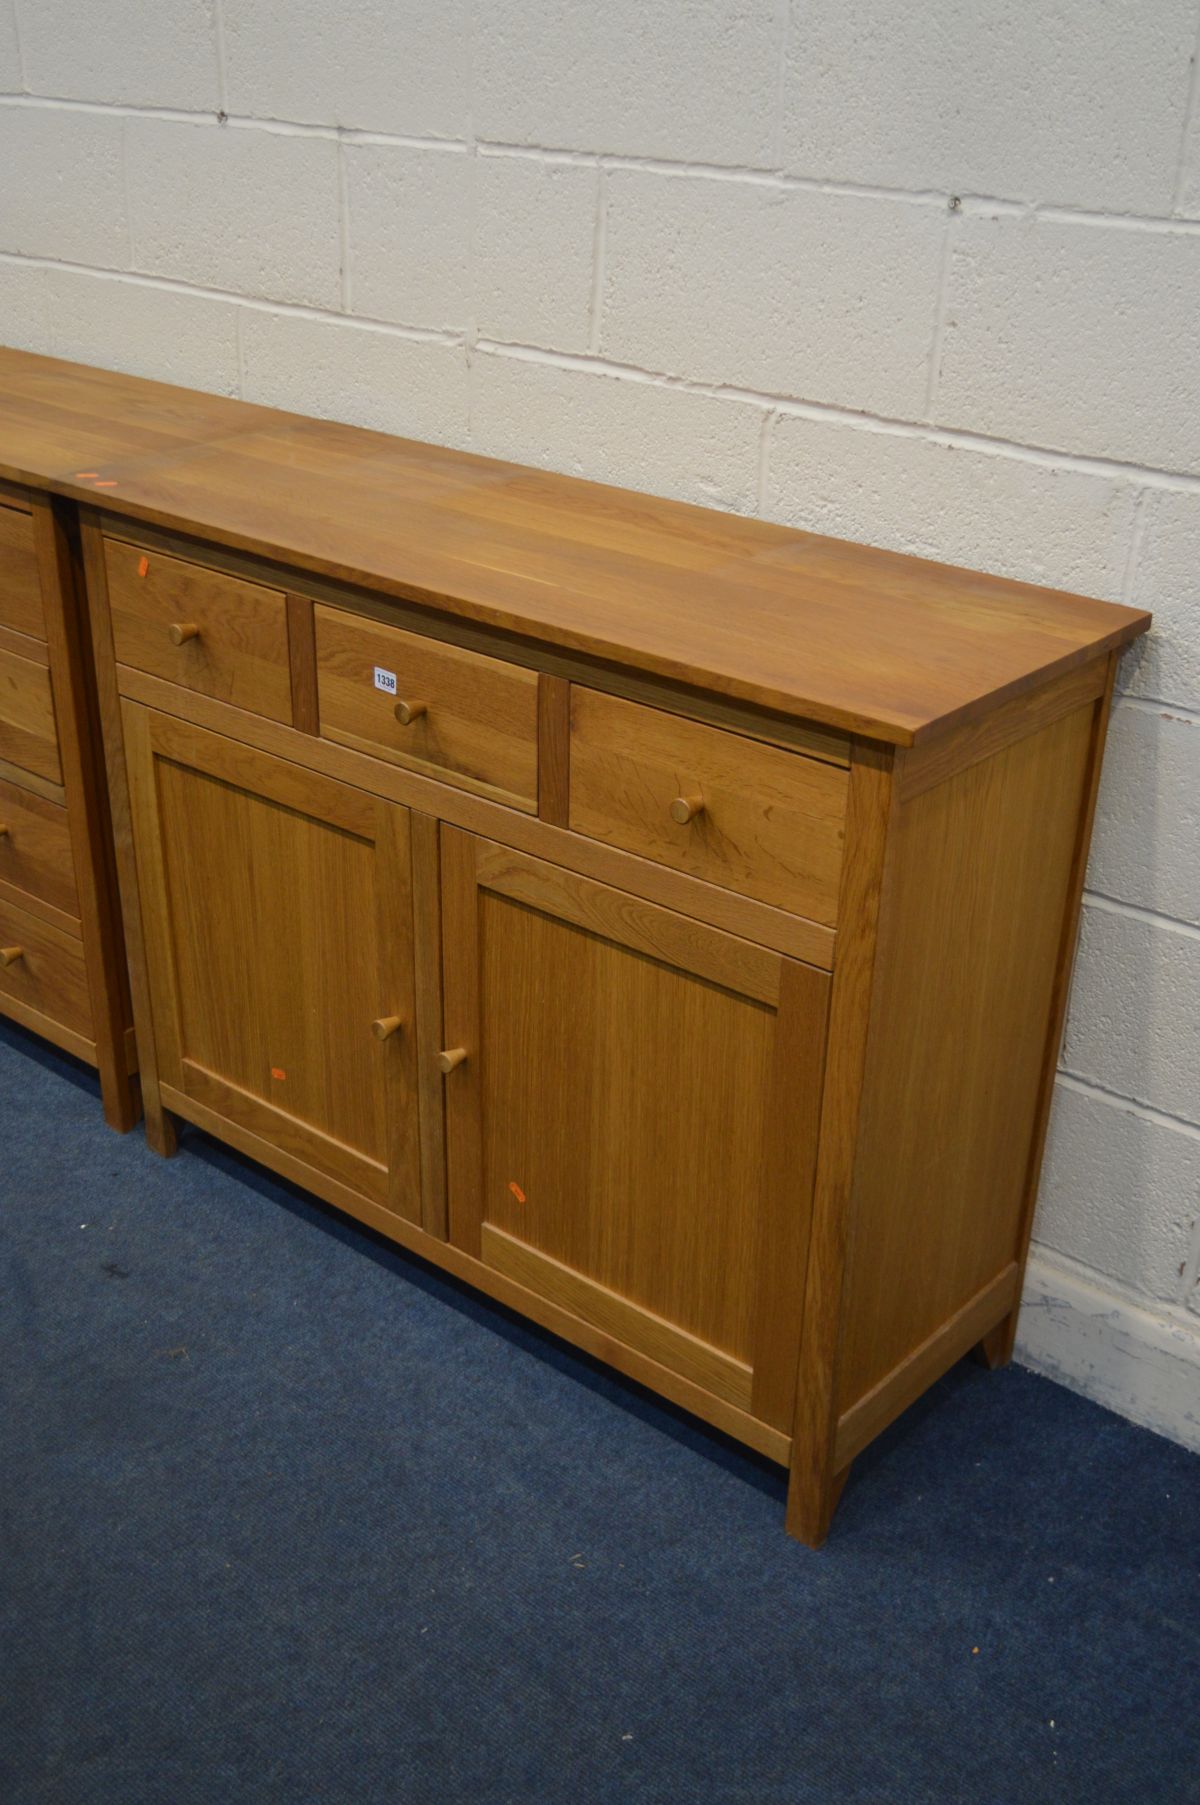 A GOLDEN OAK SIDEBOARD, with three drawers, by Corndell furniture ltd, width 119cm x depth 43cm x - Image 2 of 3